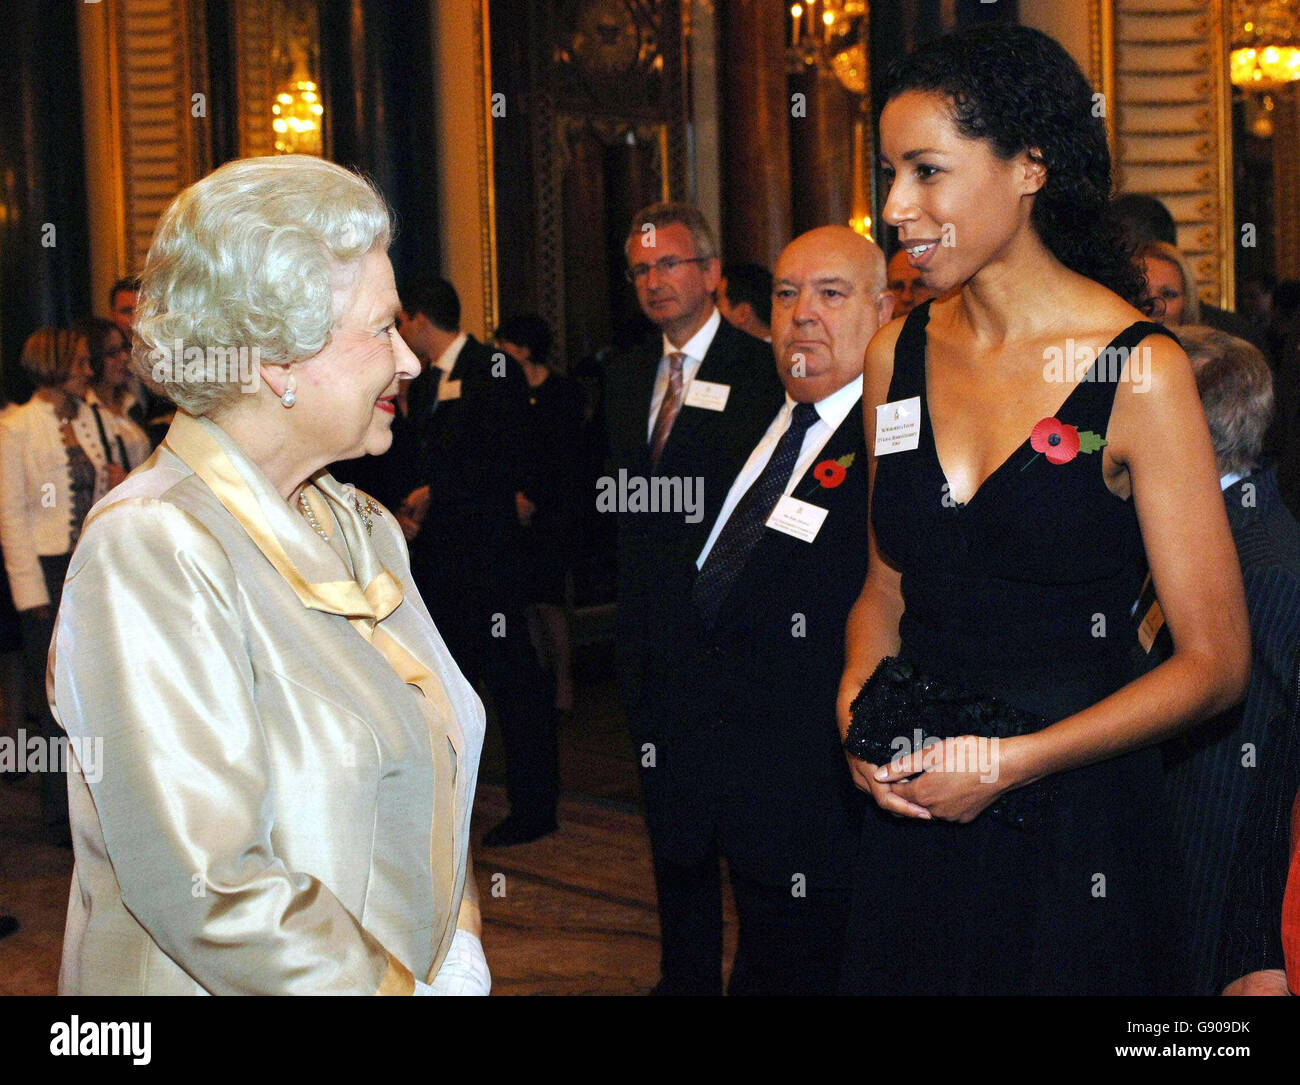 Queen Elizabeth II meets radio and television presenter Margherita Taylor, who volunteers fpr the Prince's Trust during a special reception at Buckingham Palace in recognition of guests work as volunteers, Thursday 3 November 2005. Among the celebrity guests was model Nell McAndrew and Coronation Street star Ryan Thomas, who plays Jason Grimshaw in the hit soap. McAndrew, who was wearing a skin-tight black dress with white polka dots, met both the Queen and the Duke of Edinburgh. She raises money and supports several charities, including Cancer Research UK and often takes part in races for Stock Photo